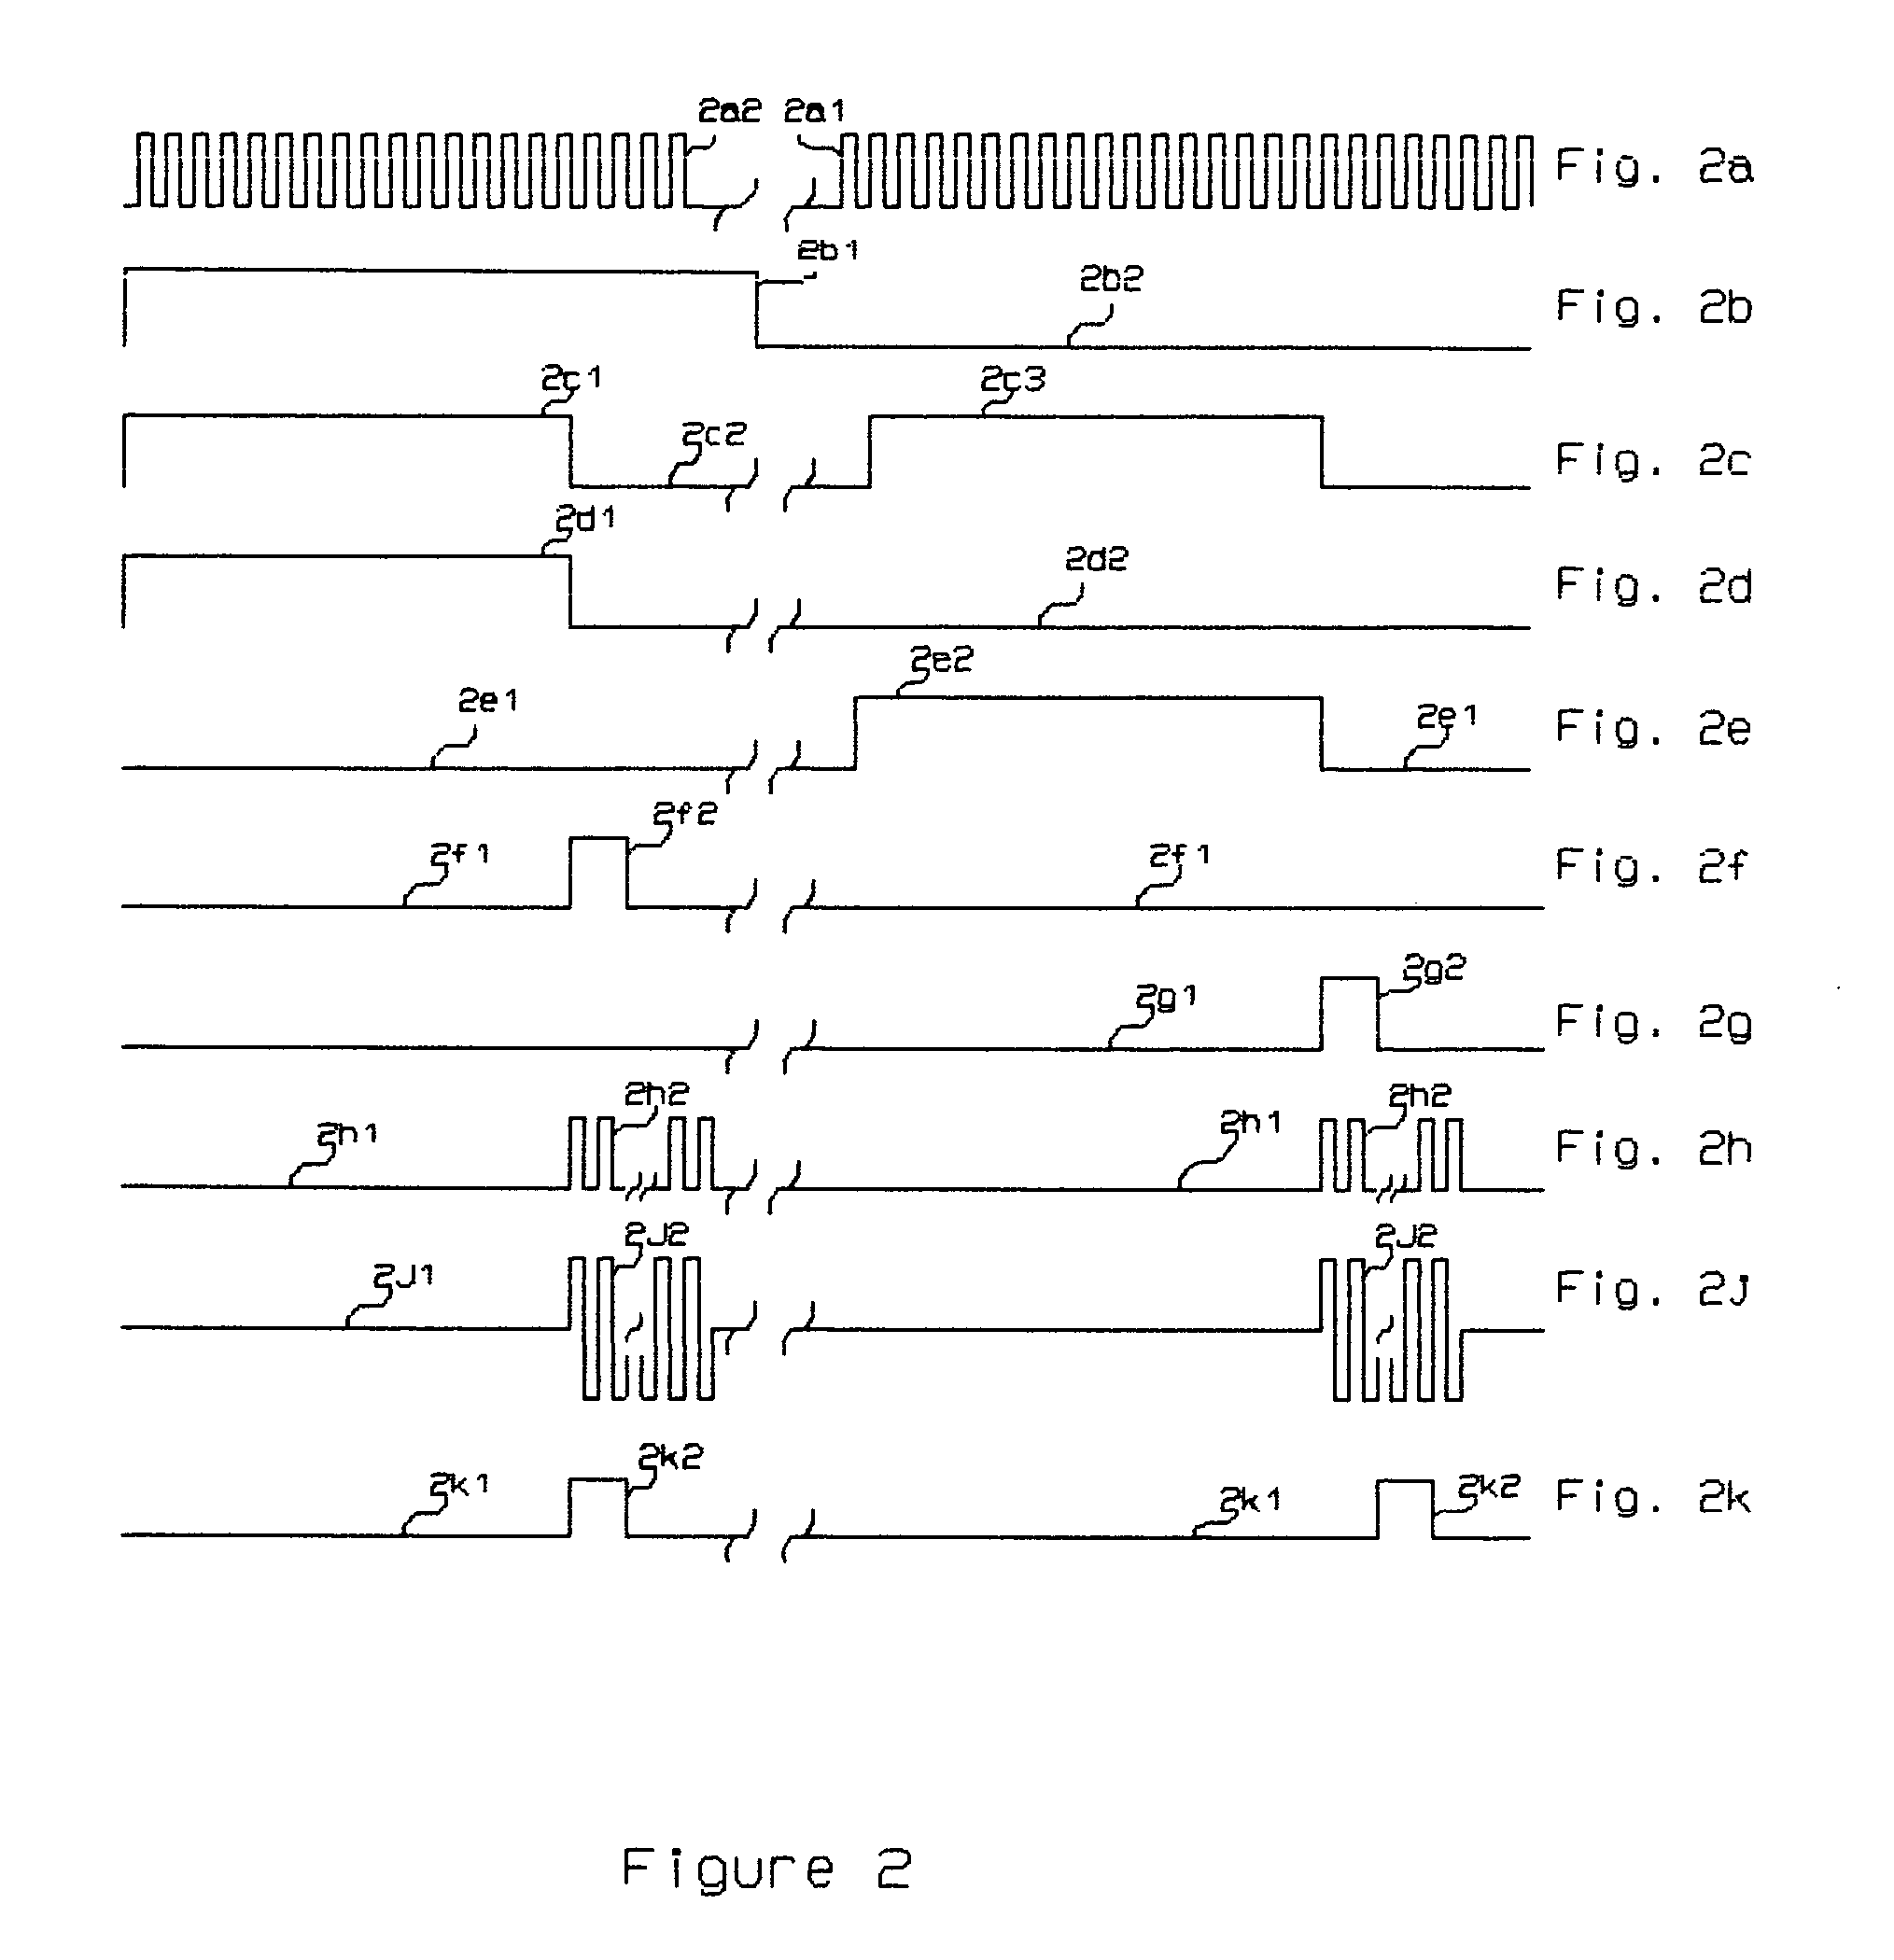 Bi-directionally driven forward converter for neutral point clamping in a modified sine wave inverter